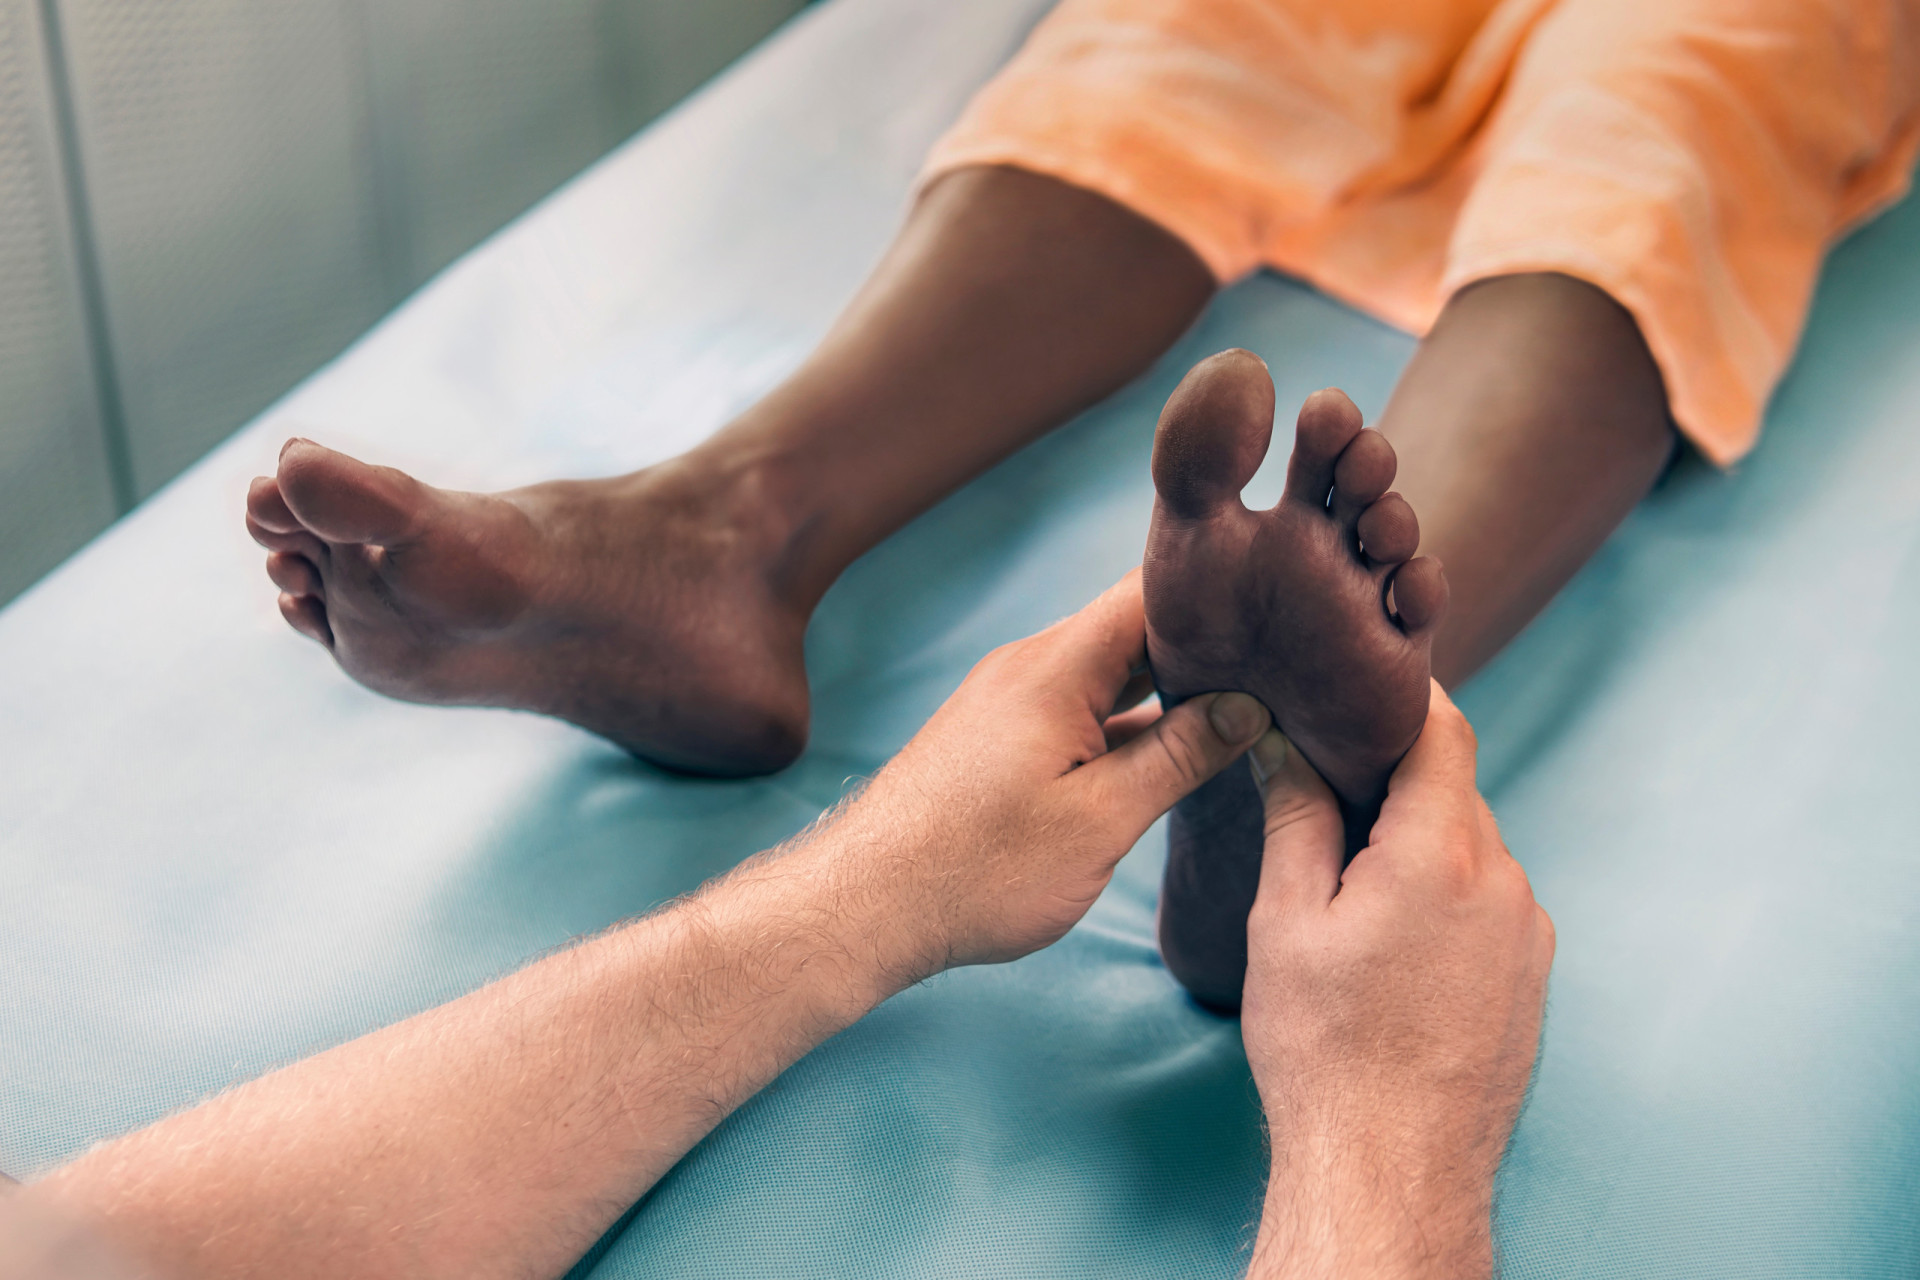 <p>Reflexology is linked to many potential benefits, such as pain reduction, relaxation, mood elevation, and improvement in feelings of anxiety.</p>